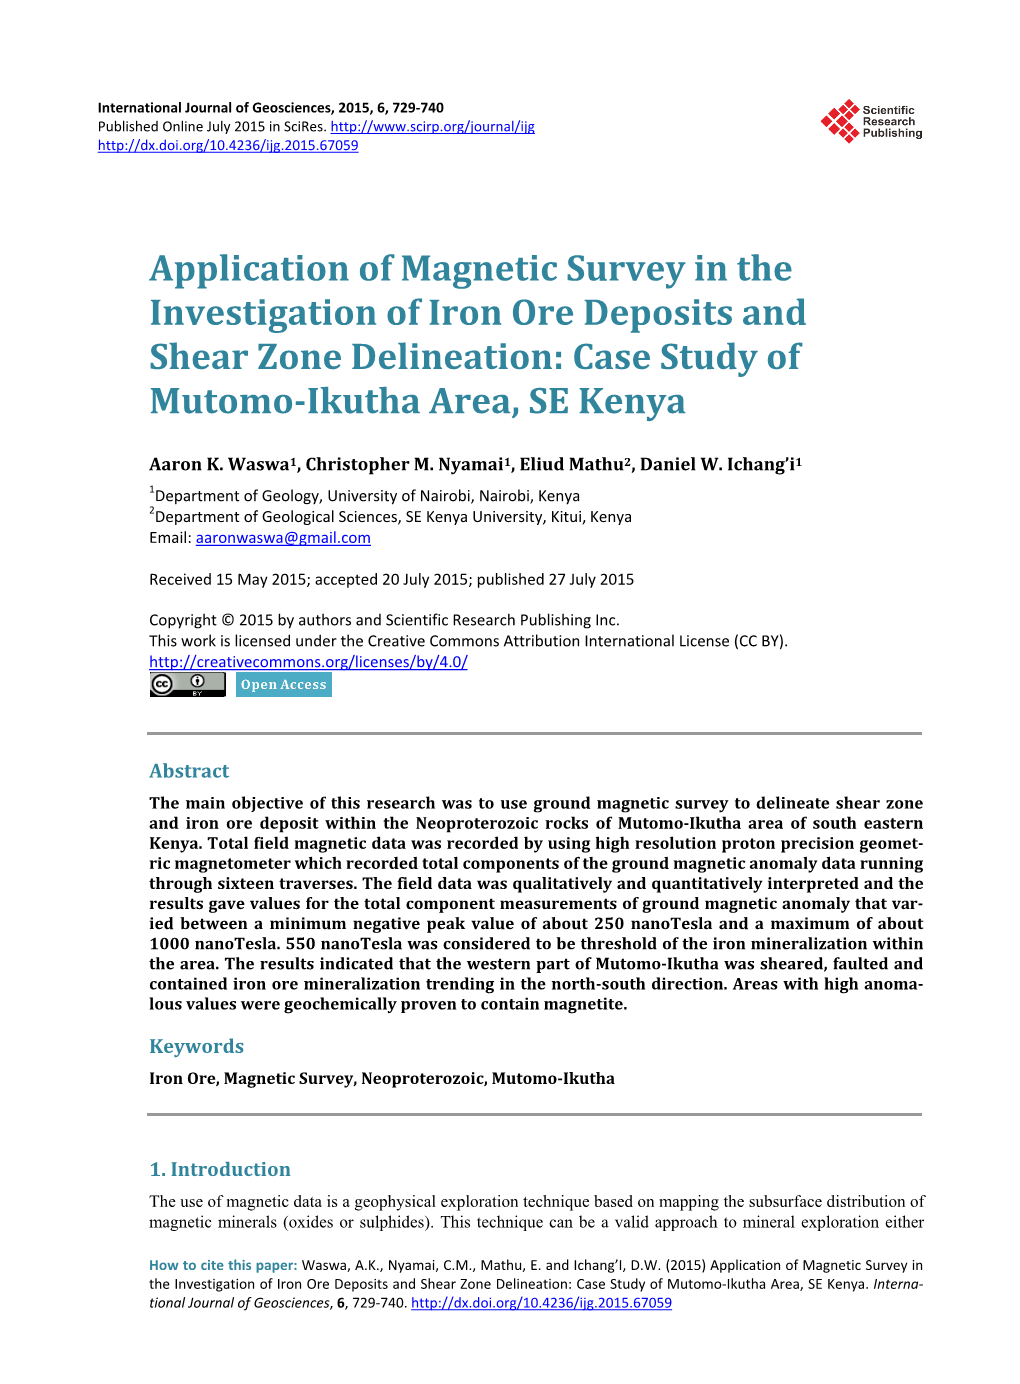 Application of Magnetic Survey in the Investigation of Iron Ore Deposits and Shear Zone Delineation: Case Study of Mutomo-Ikutha Area, SE Kenya